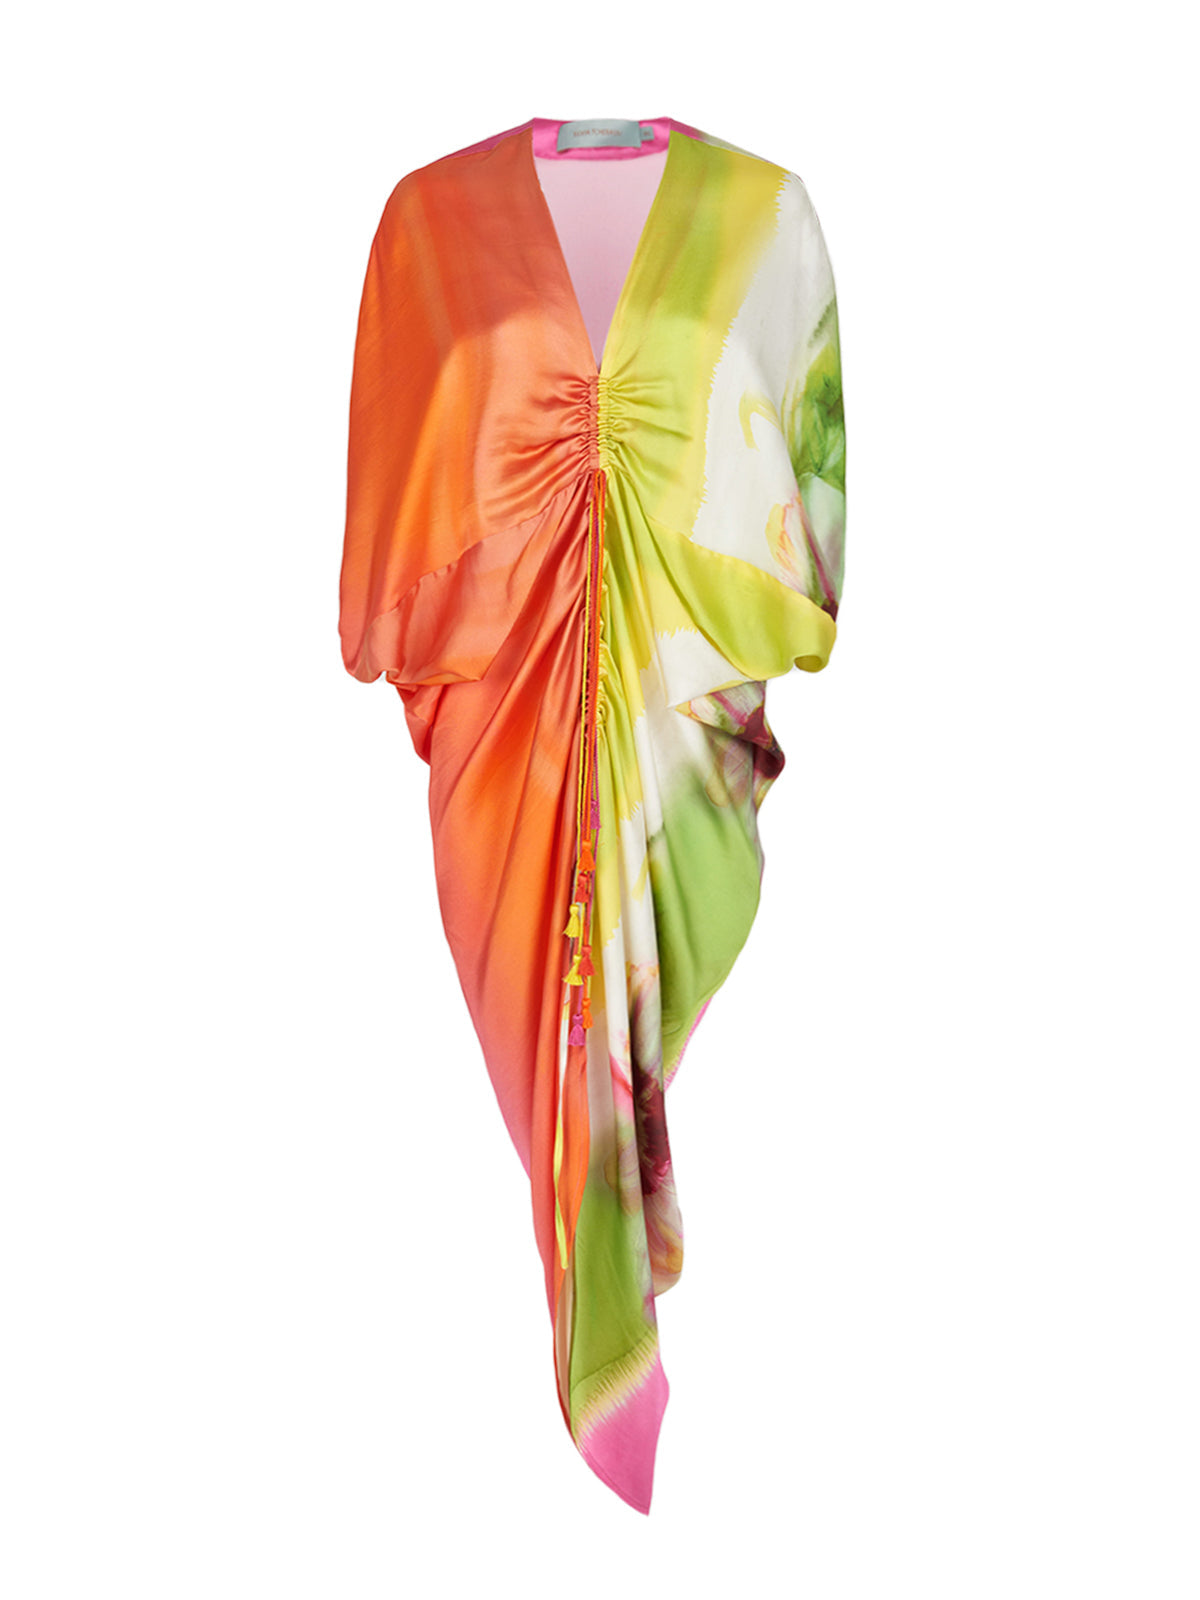 A versatile, colorful silk scarf with a Cloister Dress Floral Gradient Rainbow print on a mannequin.